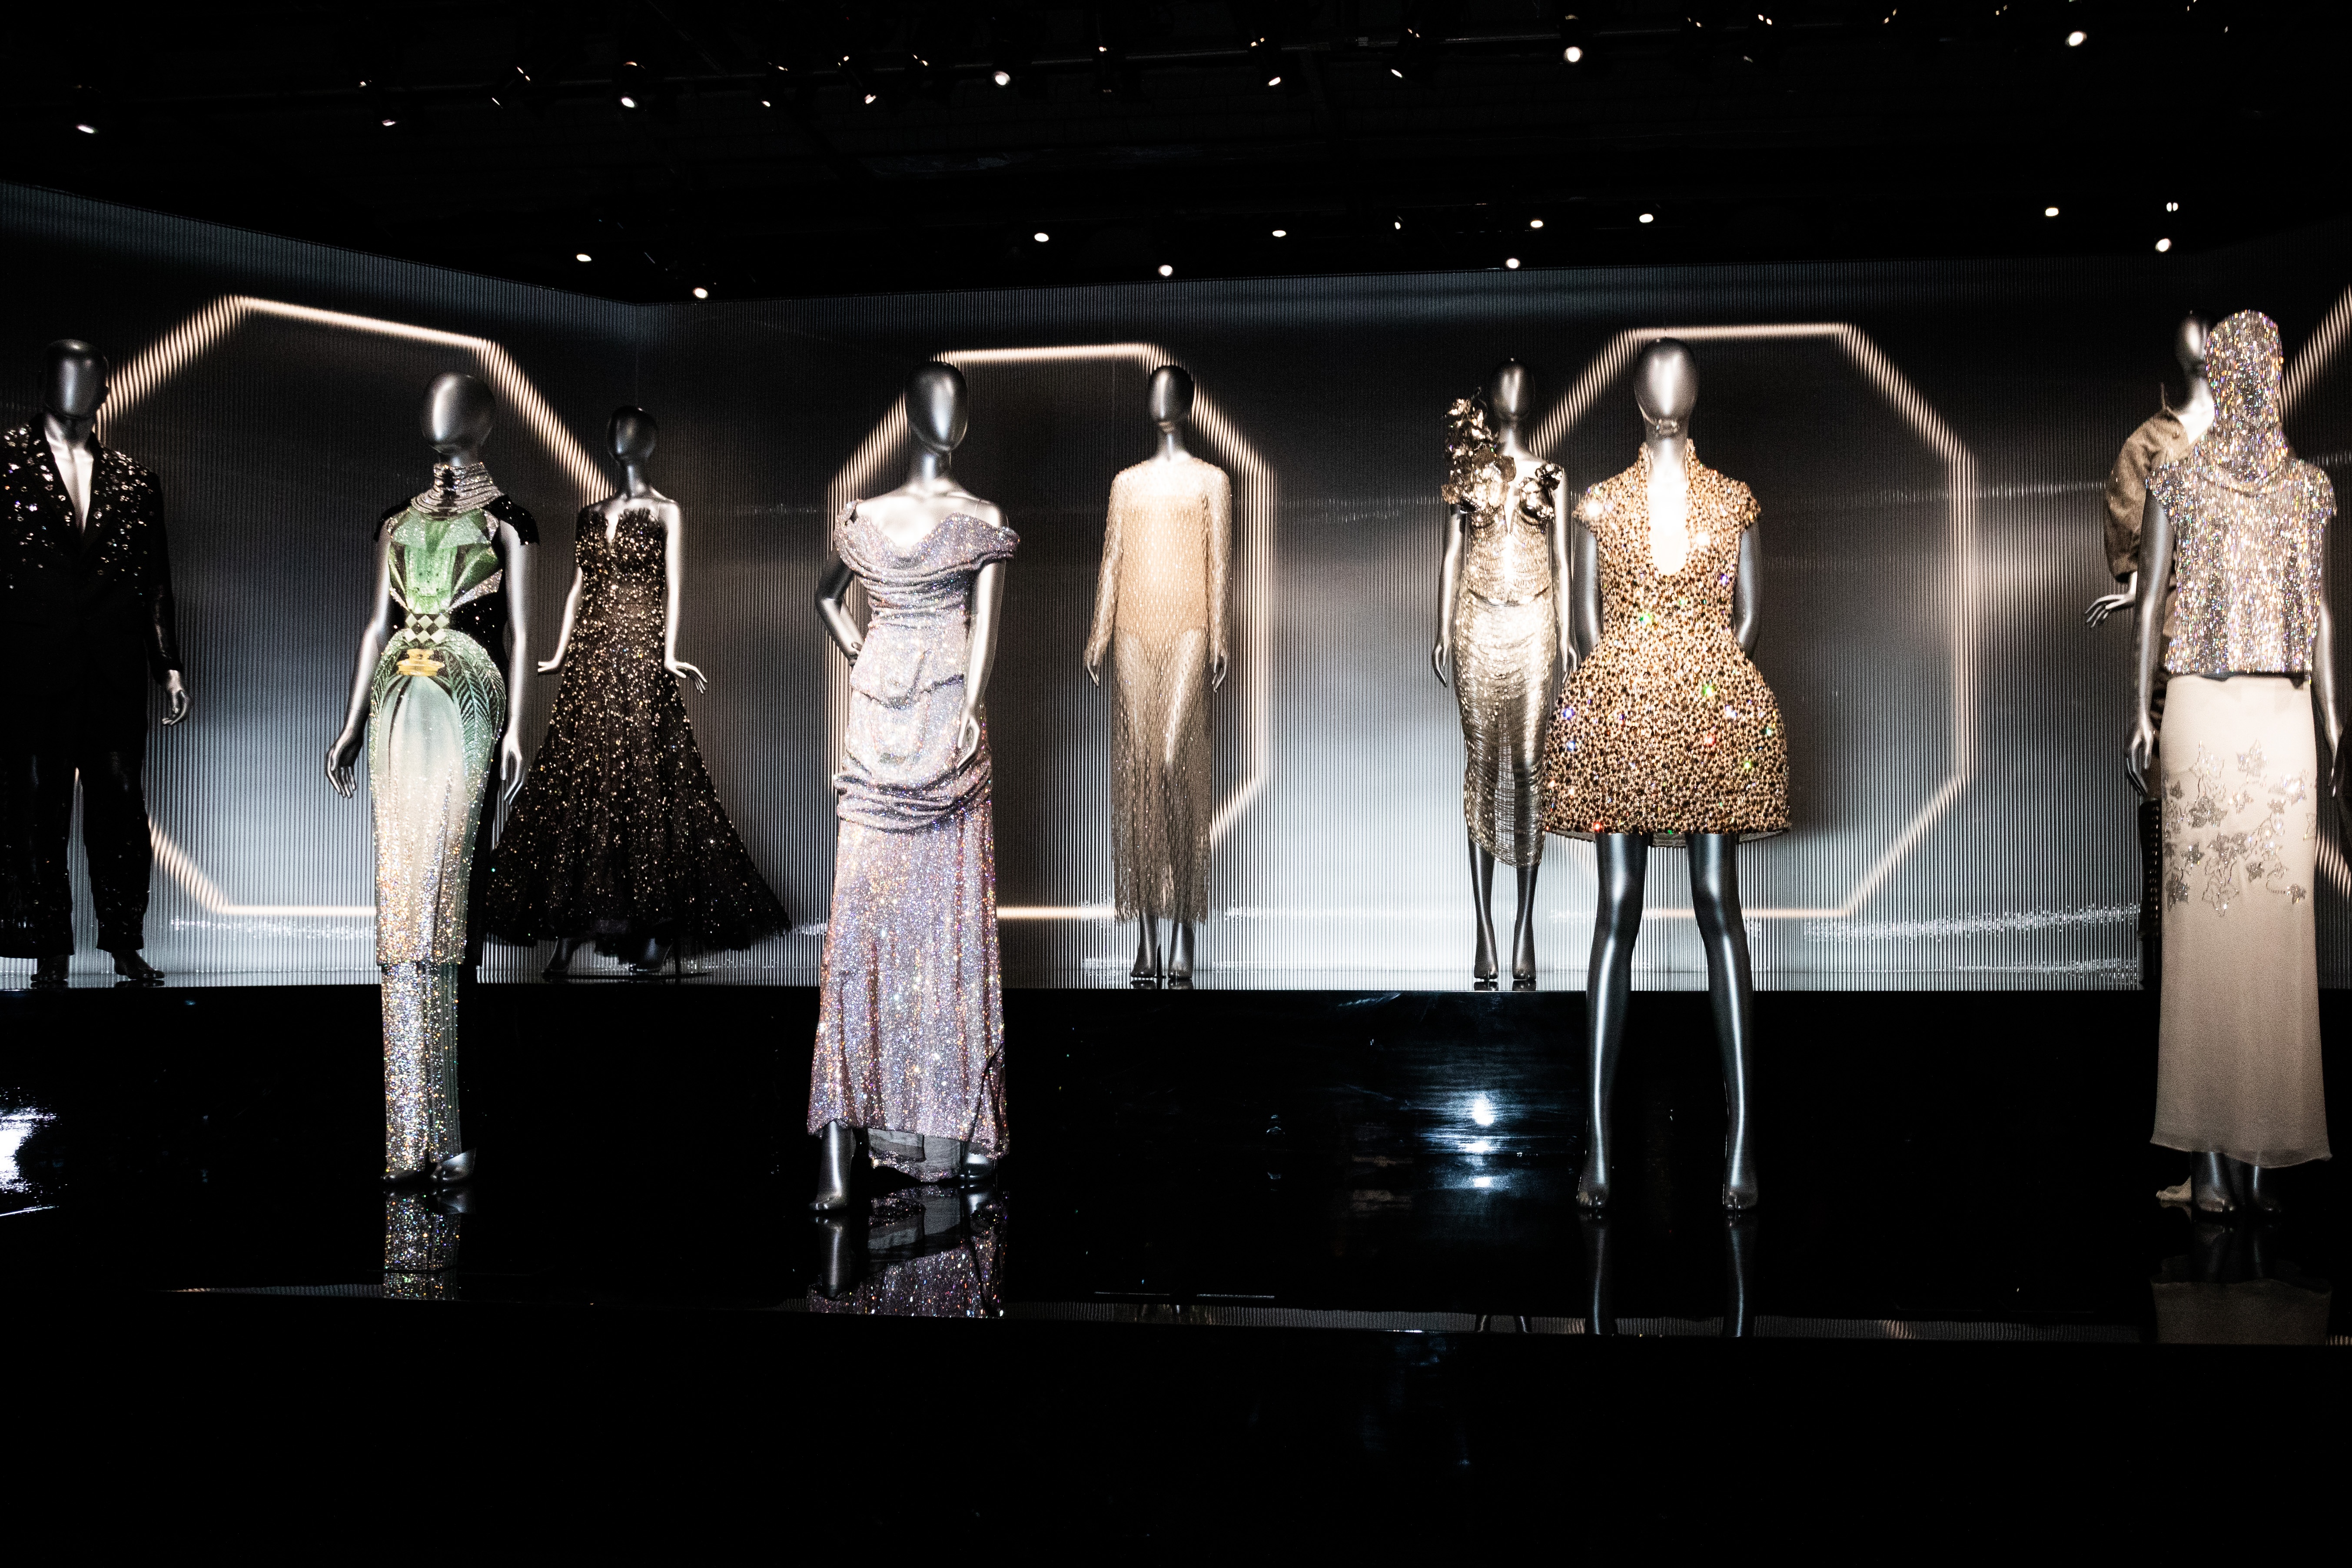 A display of high fashion collaborations in the brand's 'Masters of Light' exhibition in Shanghai. Image: Swarovski